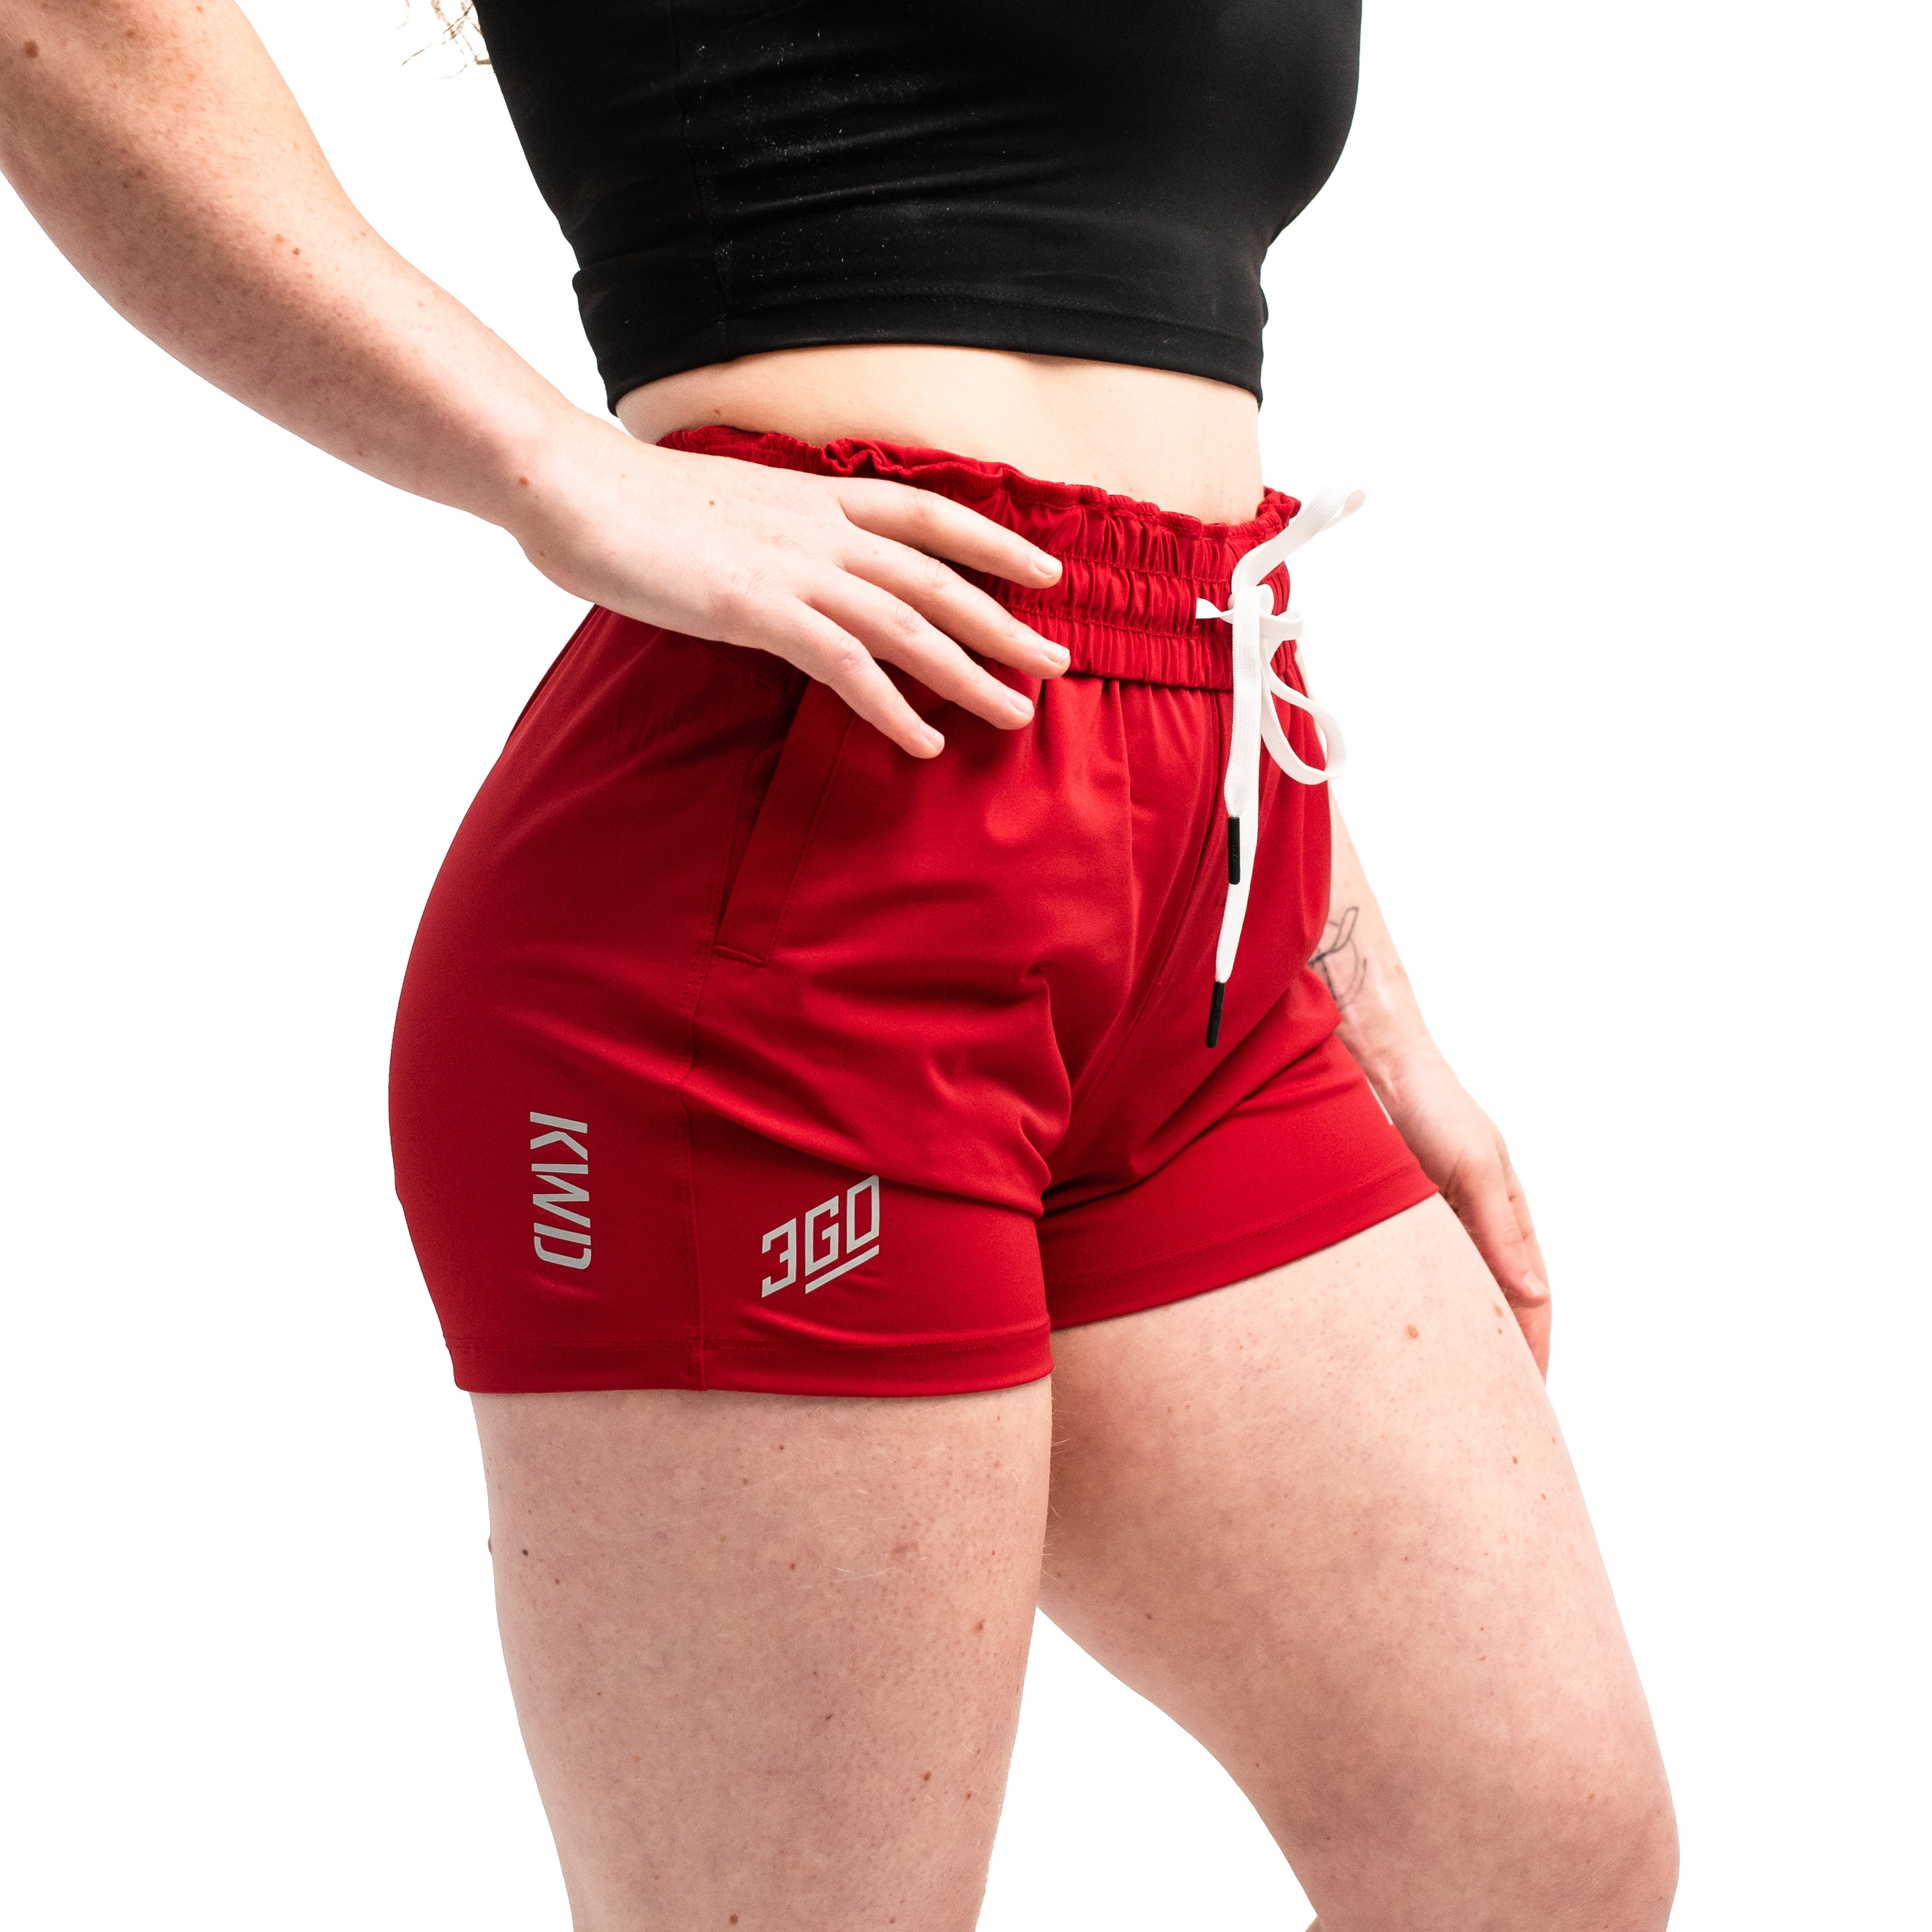 In life, the challenges we all face take Courage and Honour. This red was chosen for 360Go KWD Shorts to represent the courage we apply to become stronger than before. These shorts offer 360 degrees of stretch in all angles and allow you to remain comfortable without limiting any movement in both training and life environments.